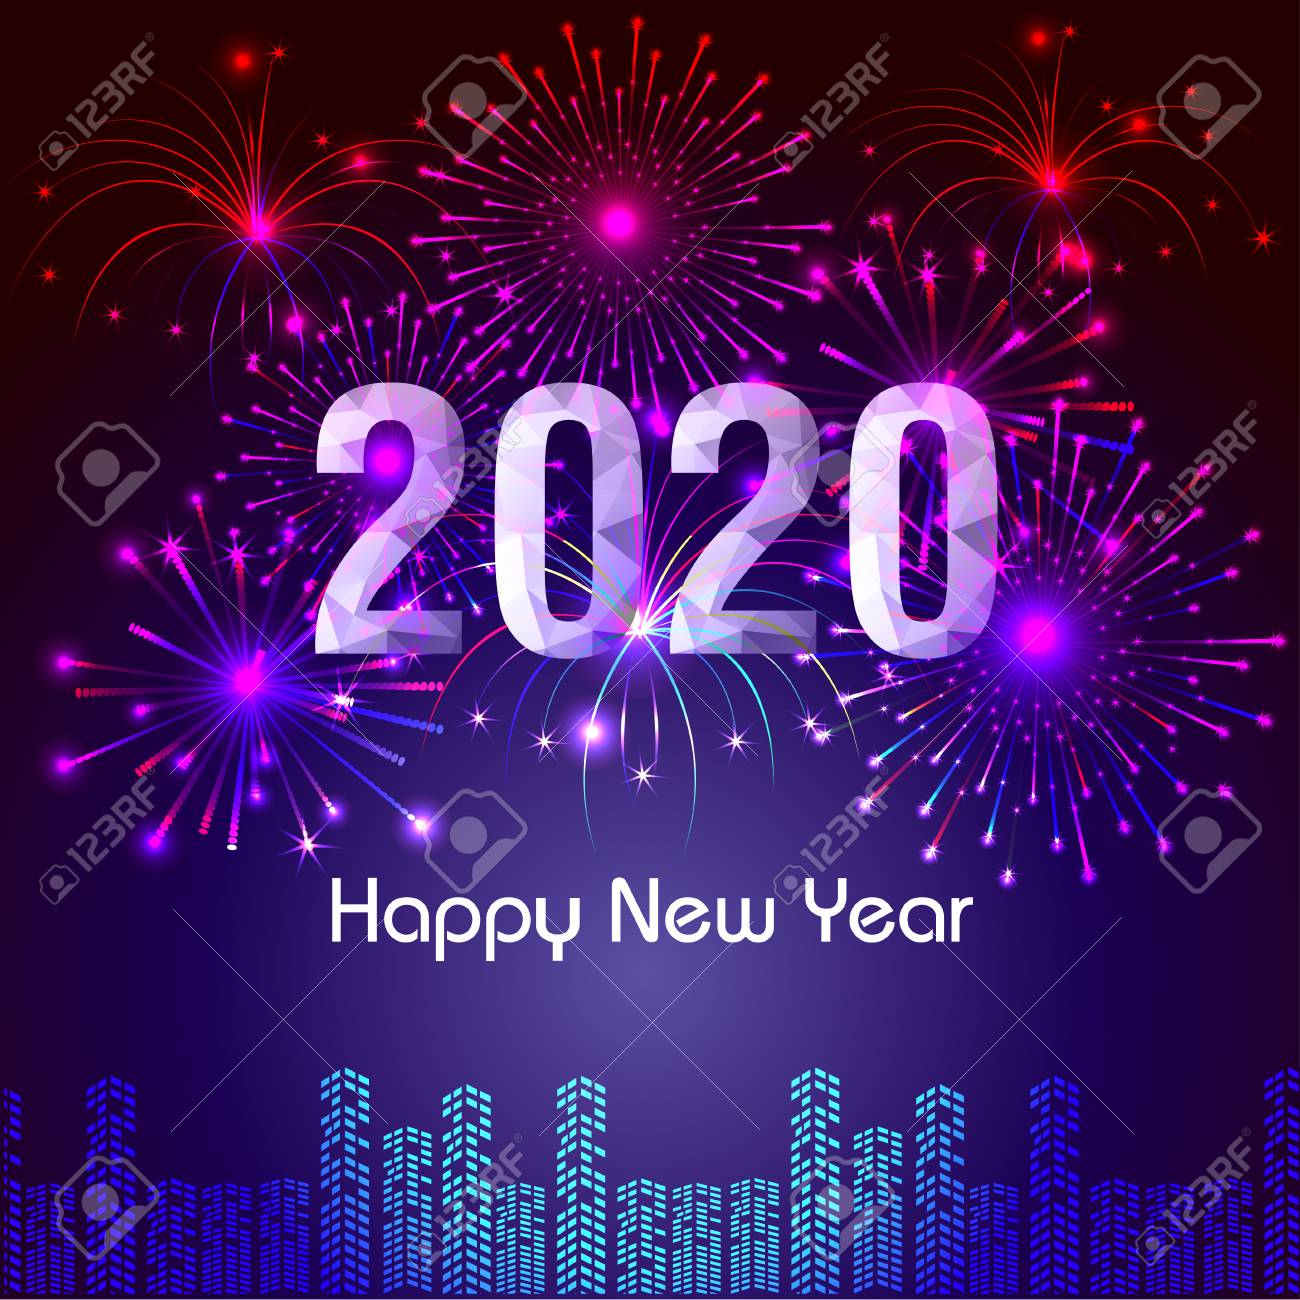 Happy New year 2020 wishes with images